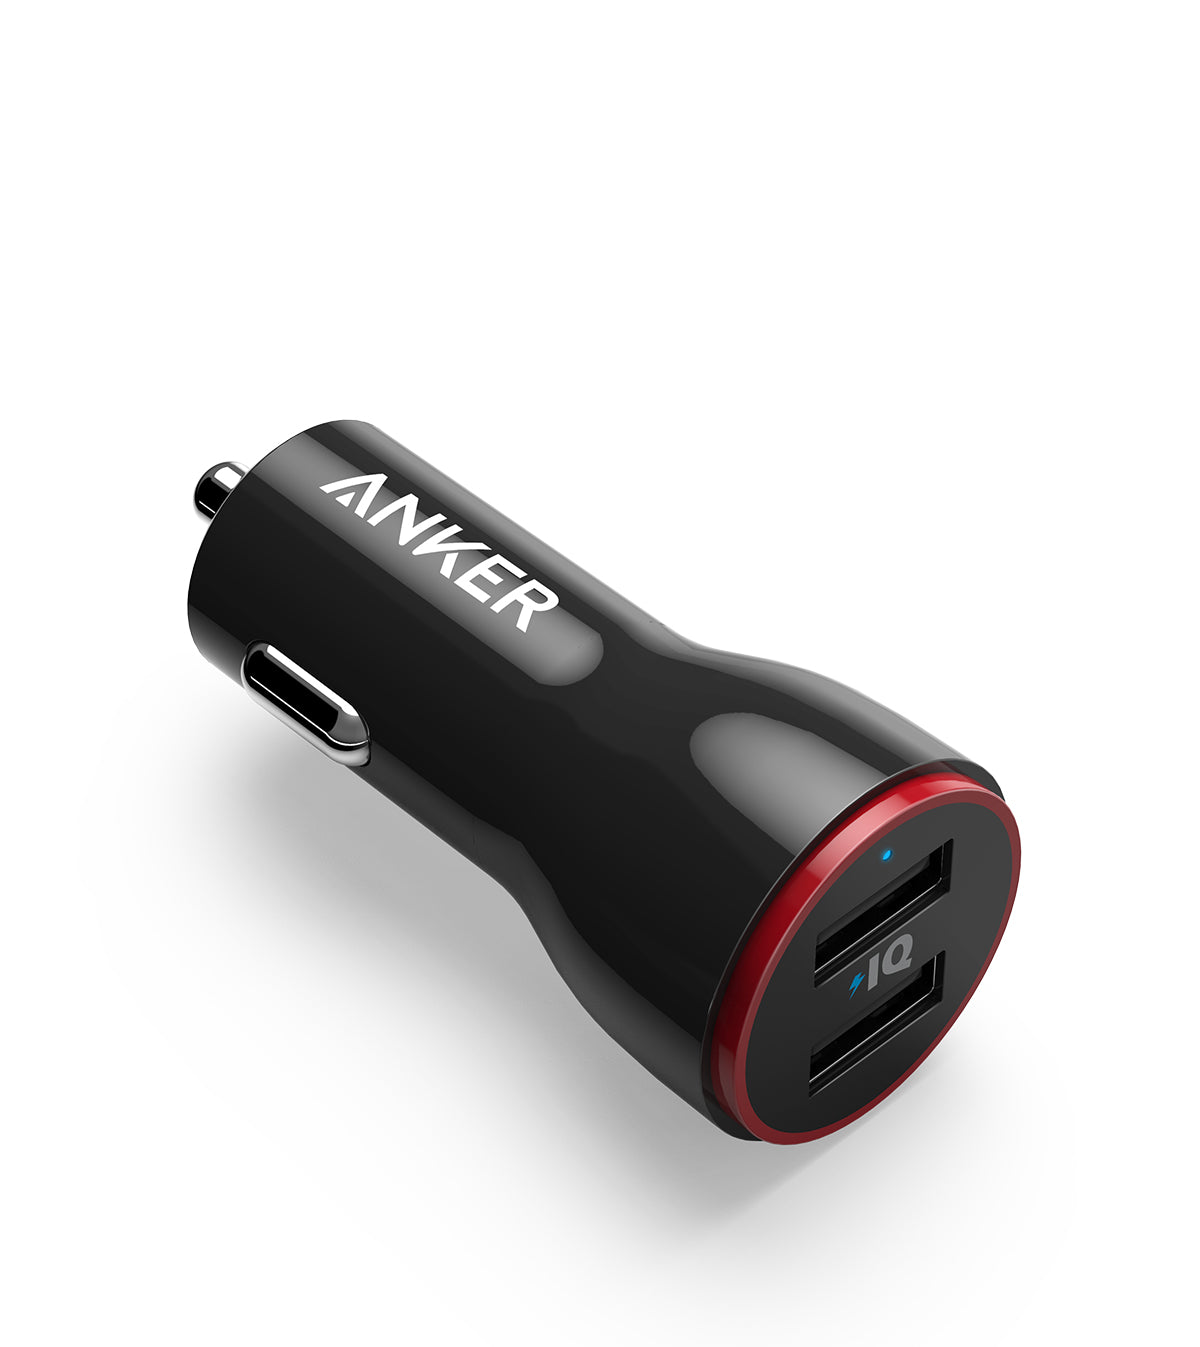 Anker PowerDrive PD+ 2 Port Car Charger